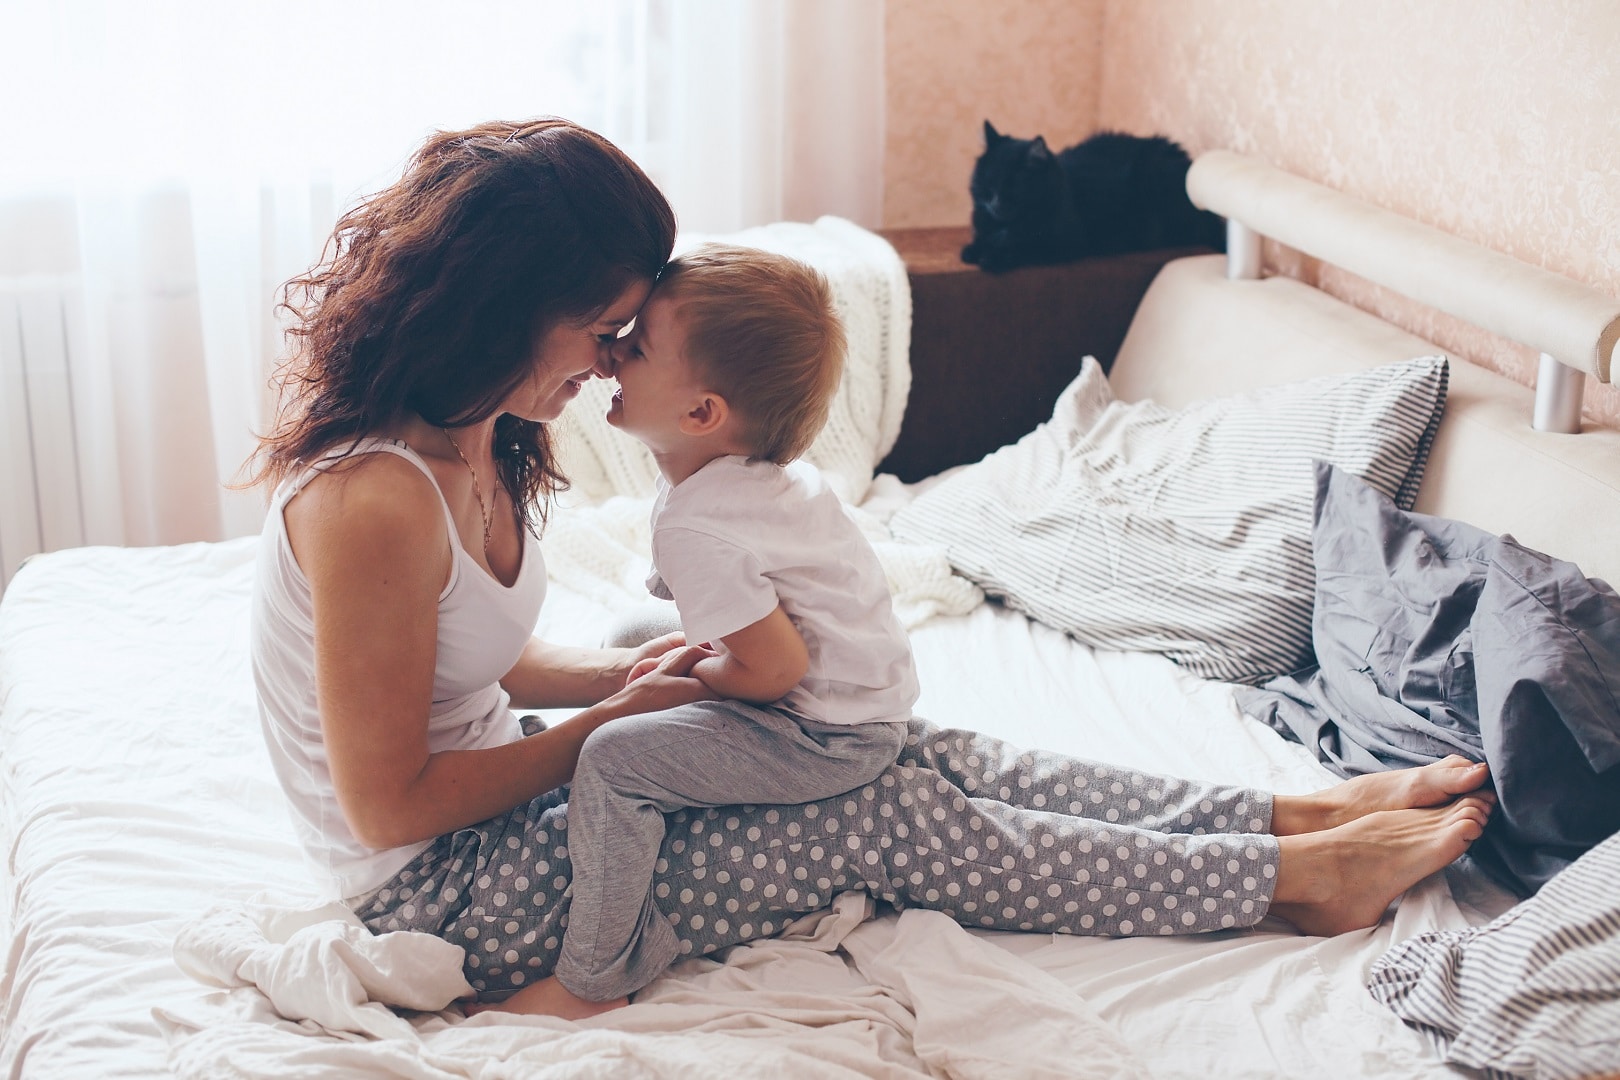 Parents Of Toddlers Have Sex An Average of 0 Times Per Month - 13 Tips to Reduce Your Parenting Stress and Anxiety